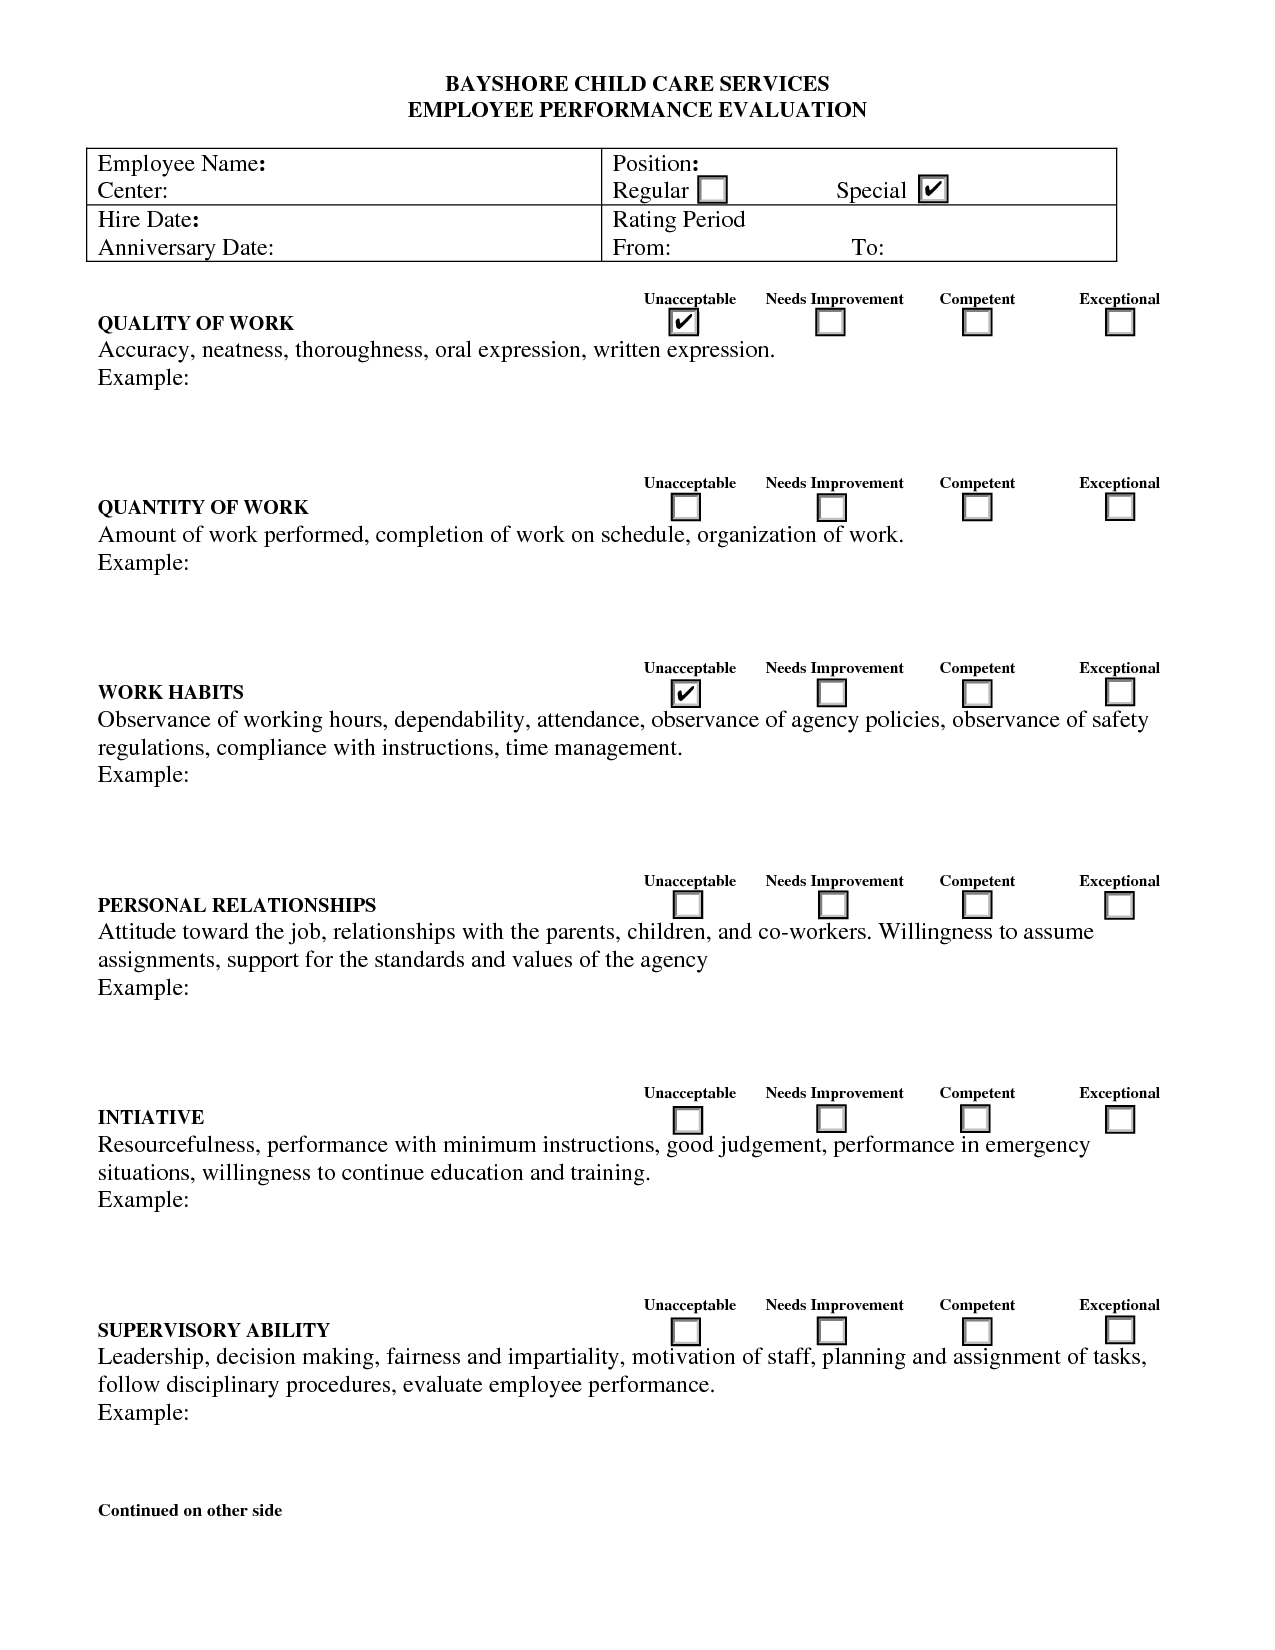 Evaluation Form For Child Care Google Search With Images Child